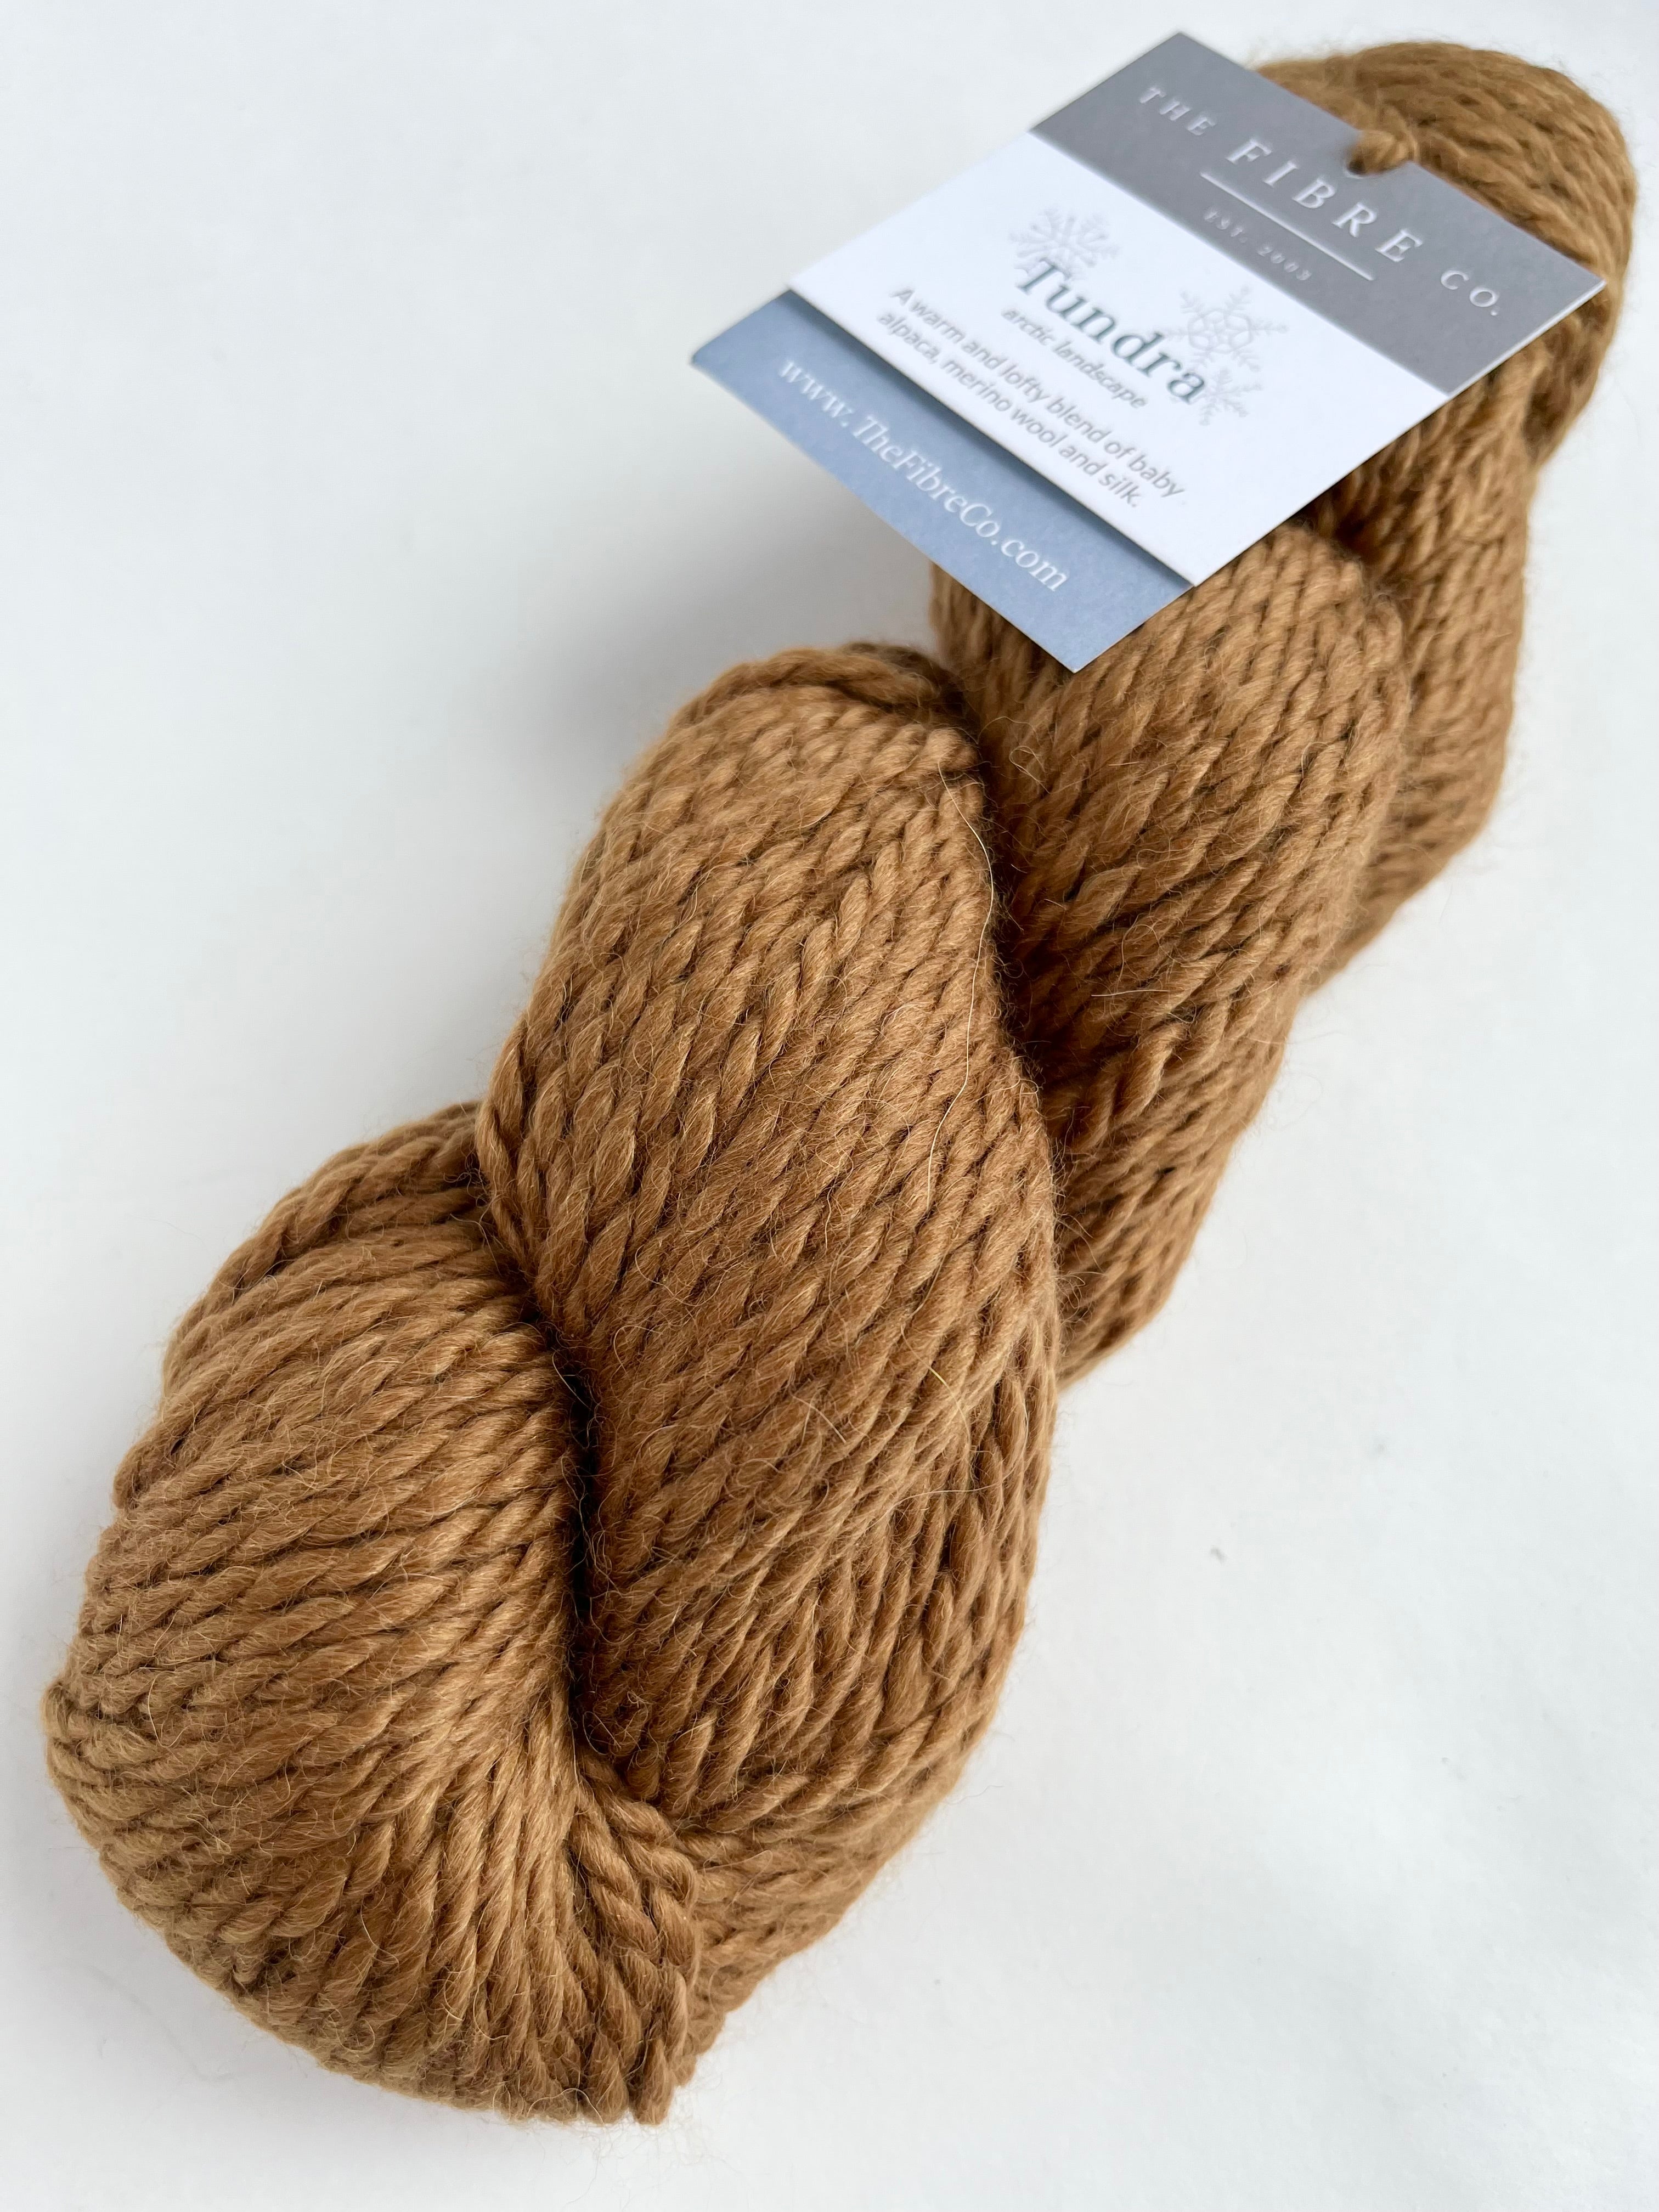 Larch - Tundra from the Fibre Co.